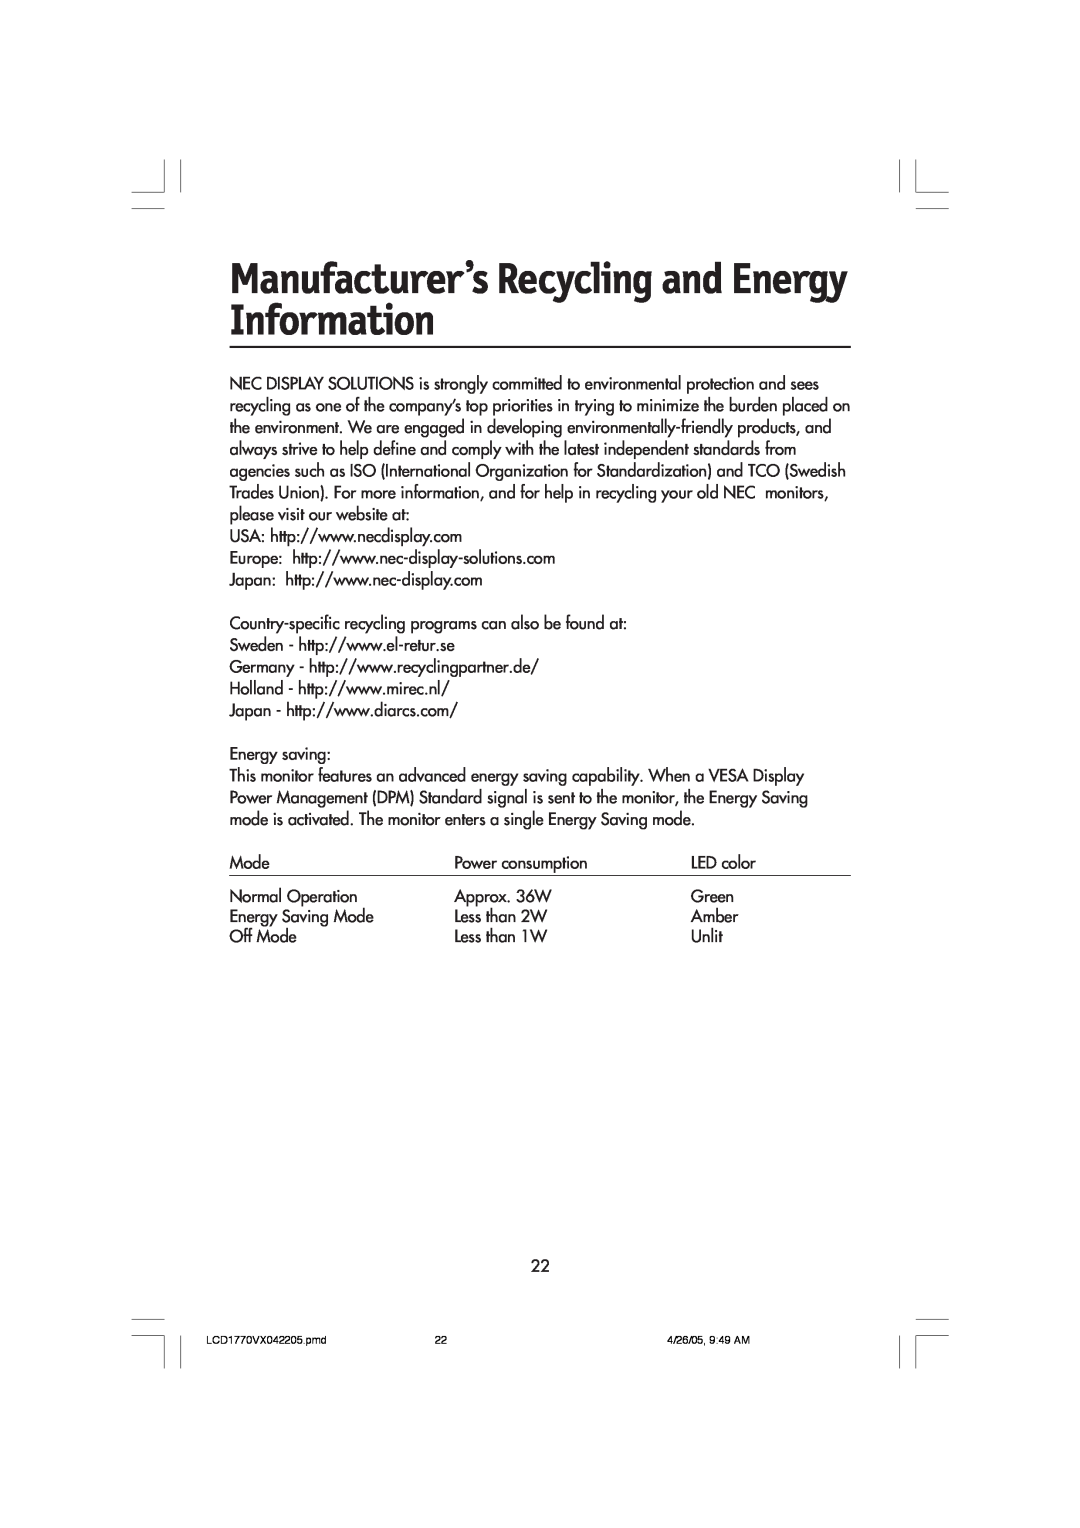 NEC LCD1770VX user manual Manufacturer’s Recycling and Energy Information 